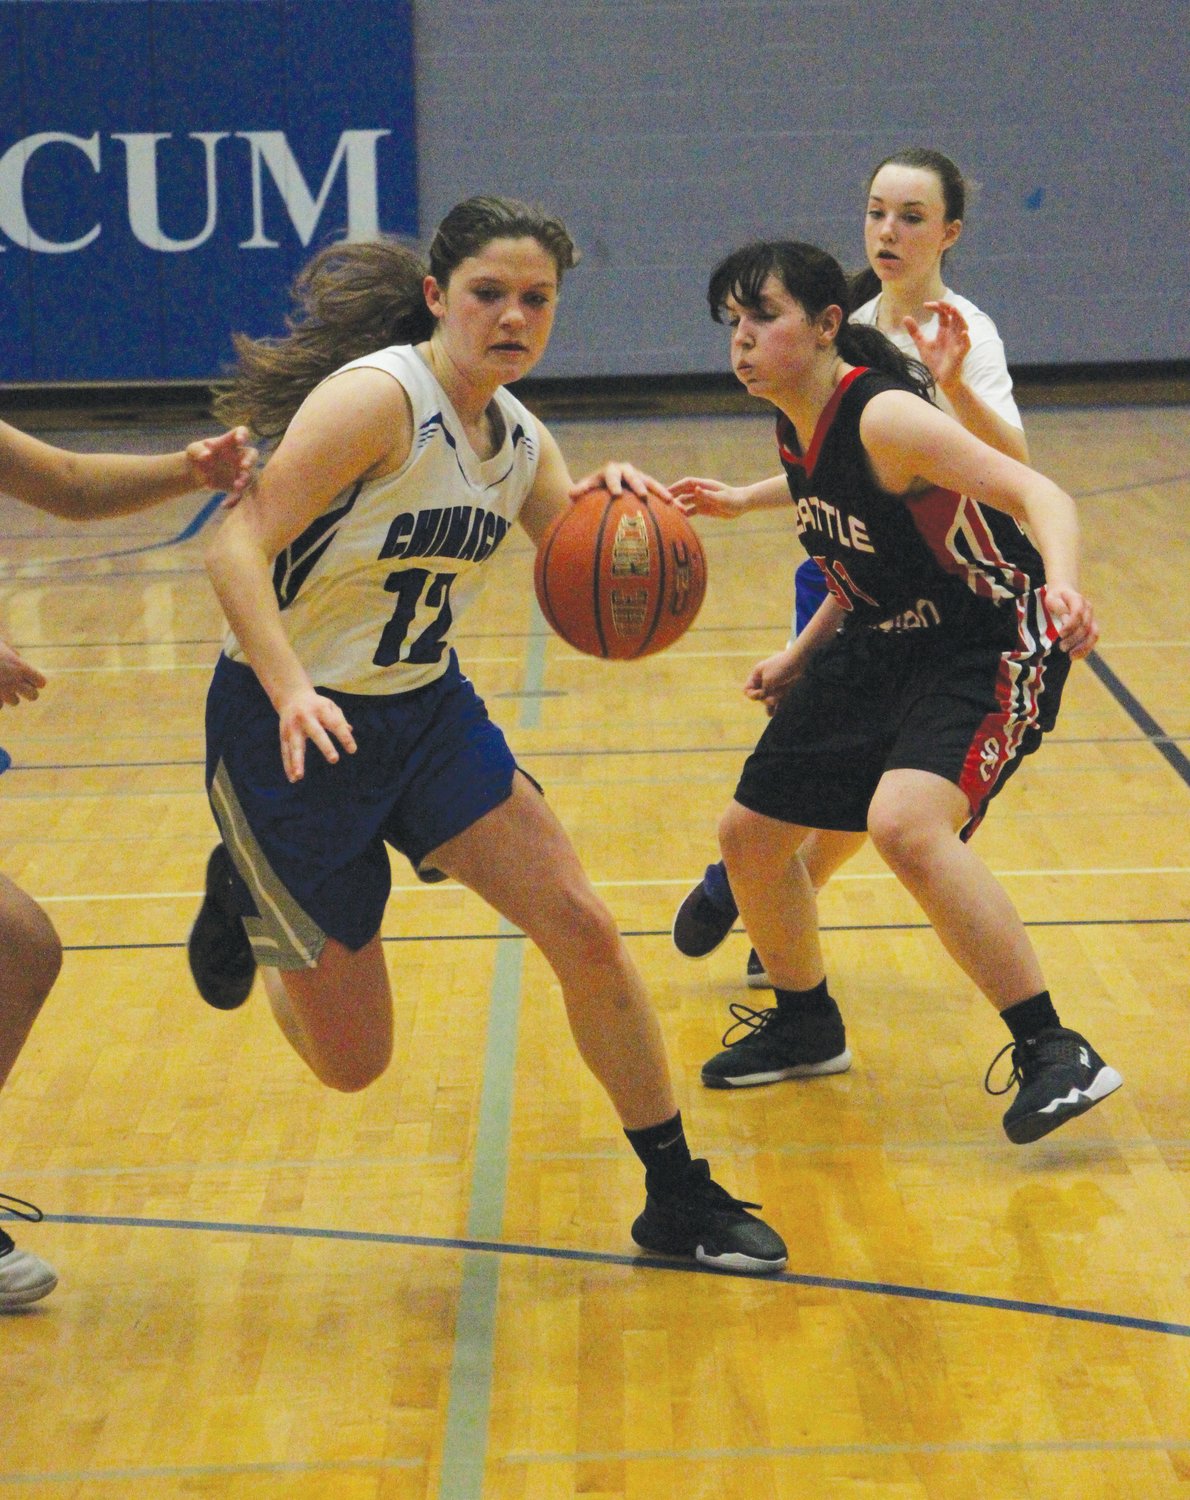 Rivals starter Aurin Asbell weaves between defenders on her way to the bucket.